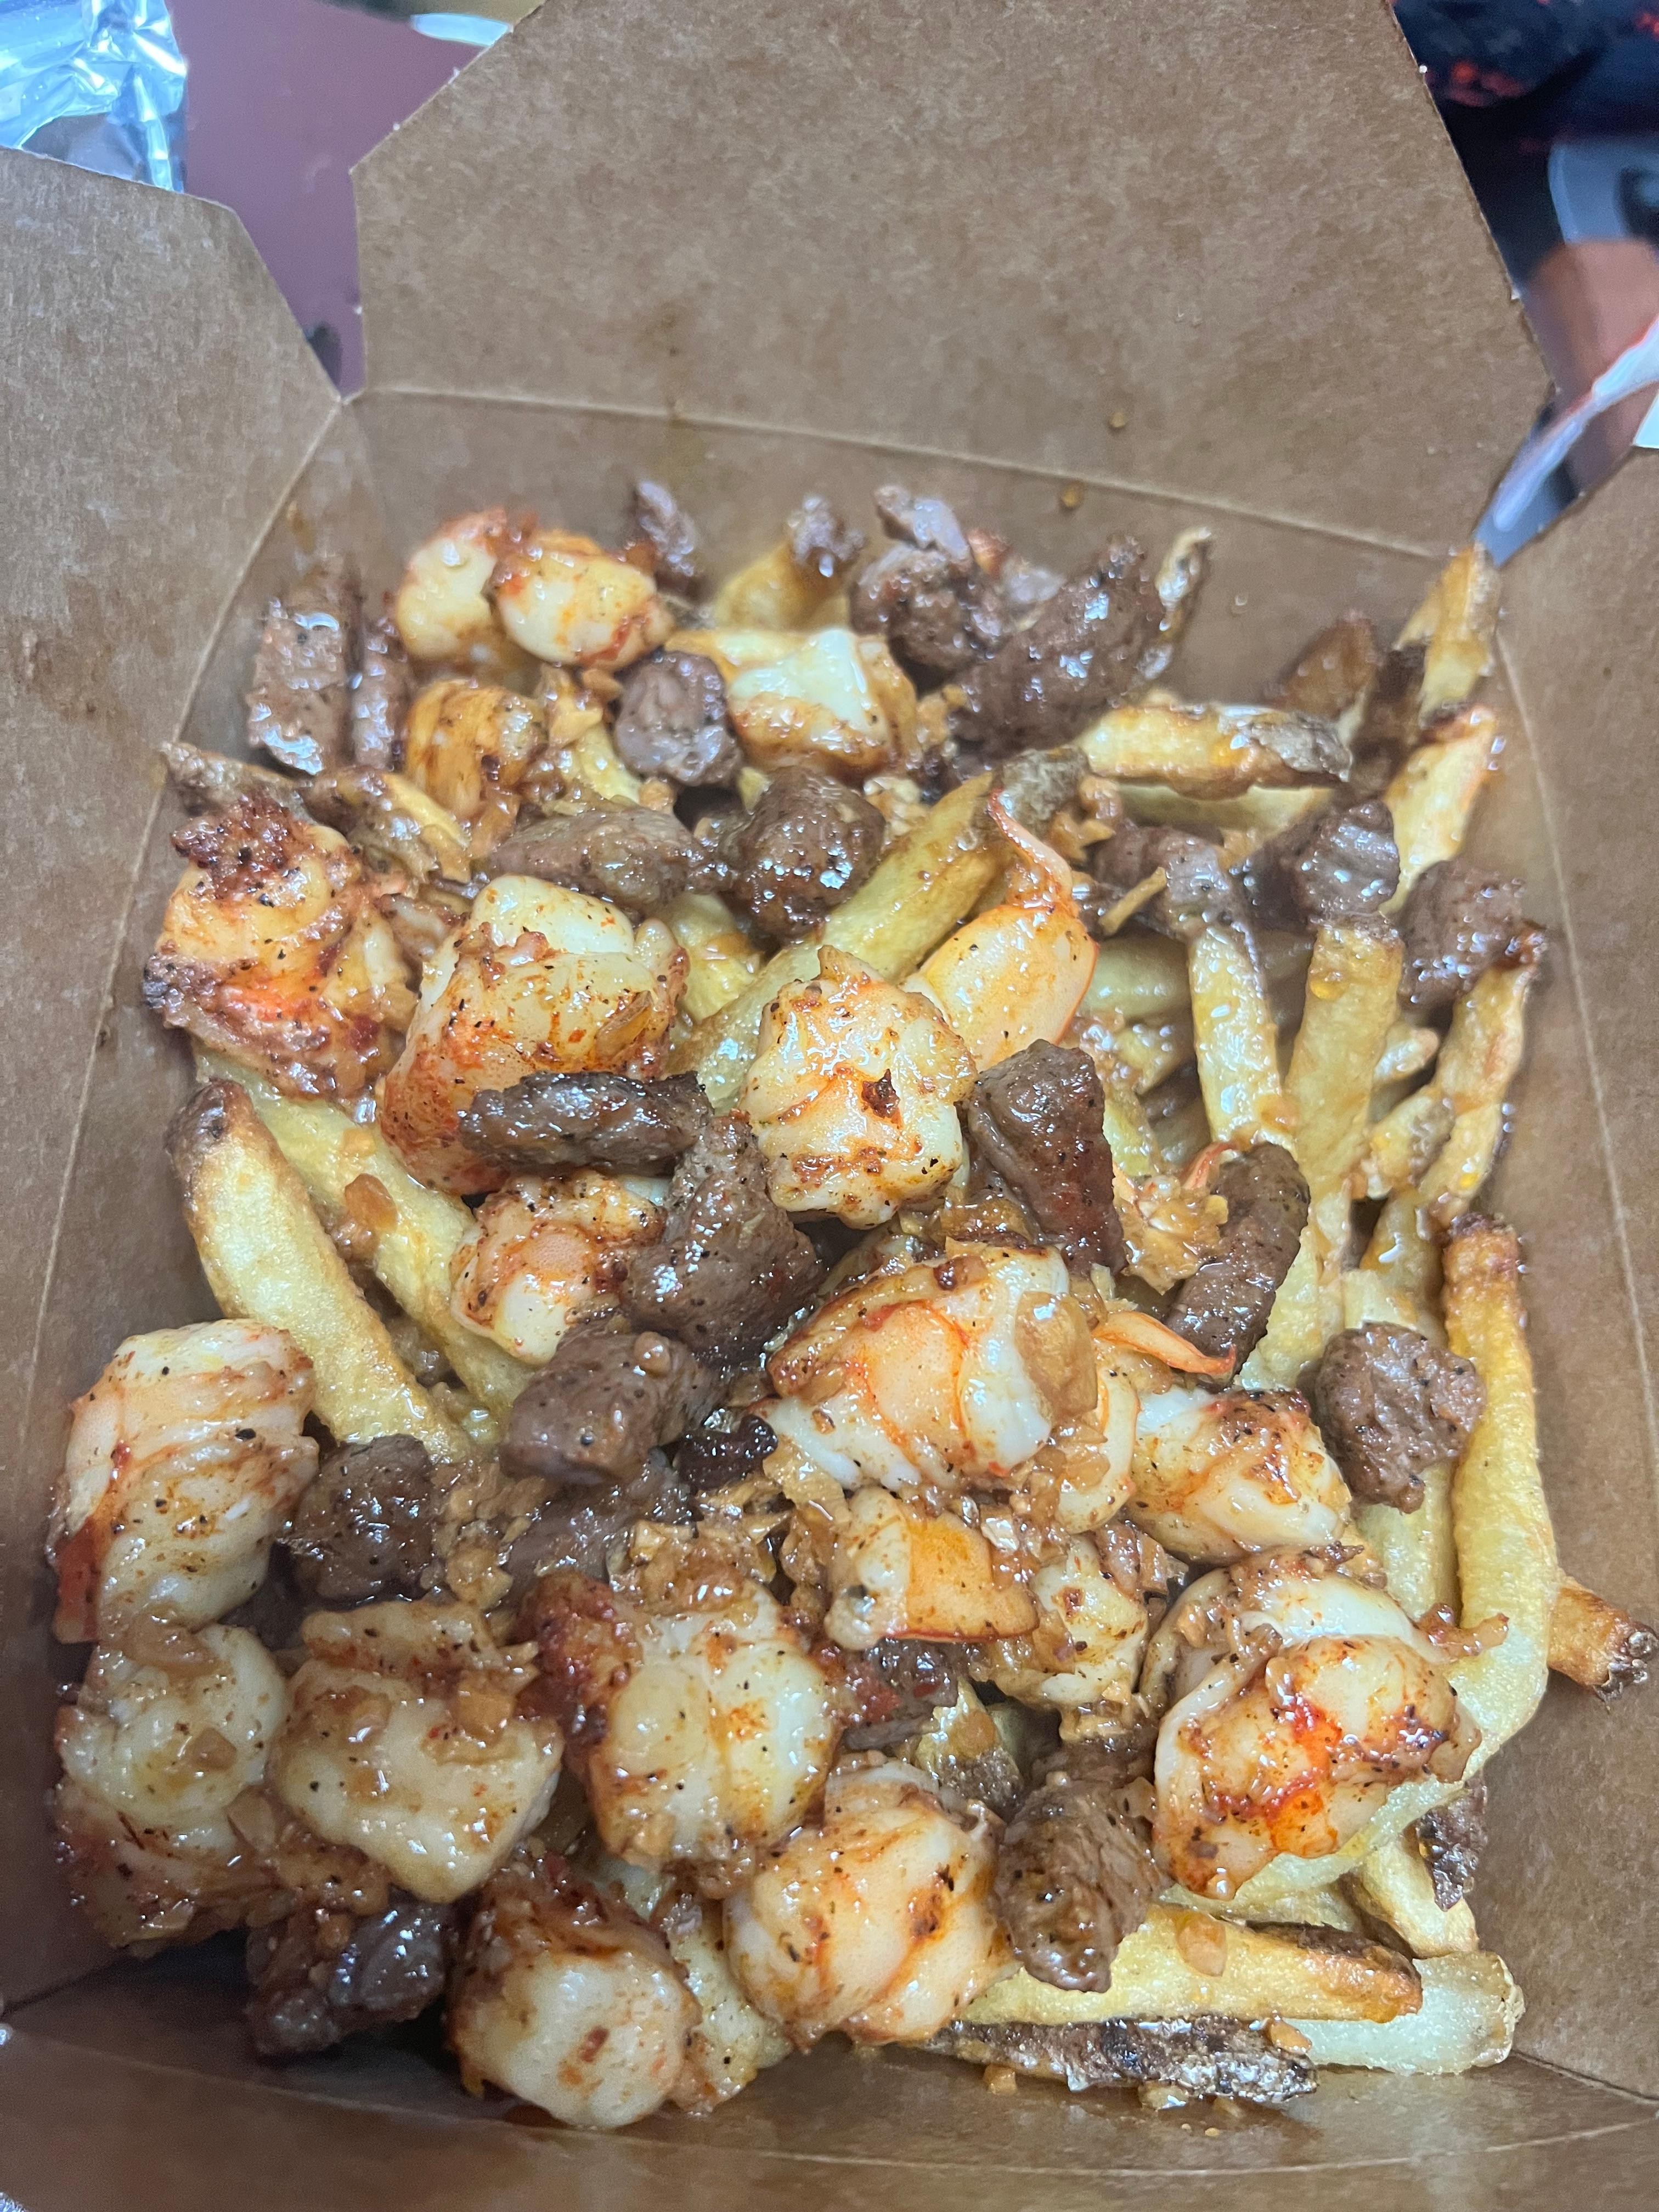 Surf and turf fries!